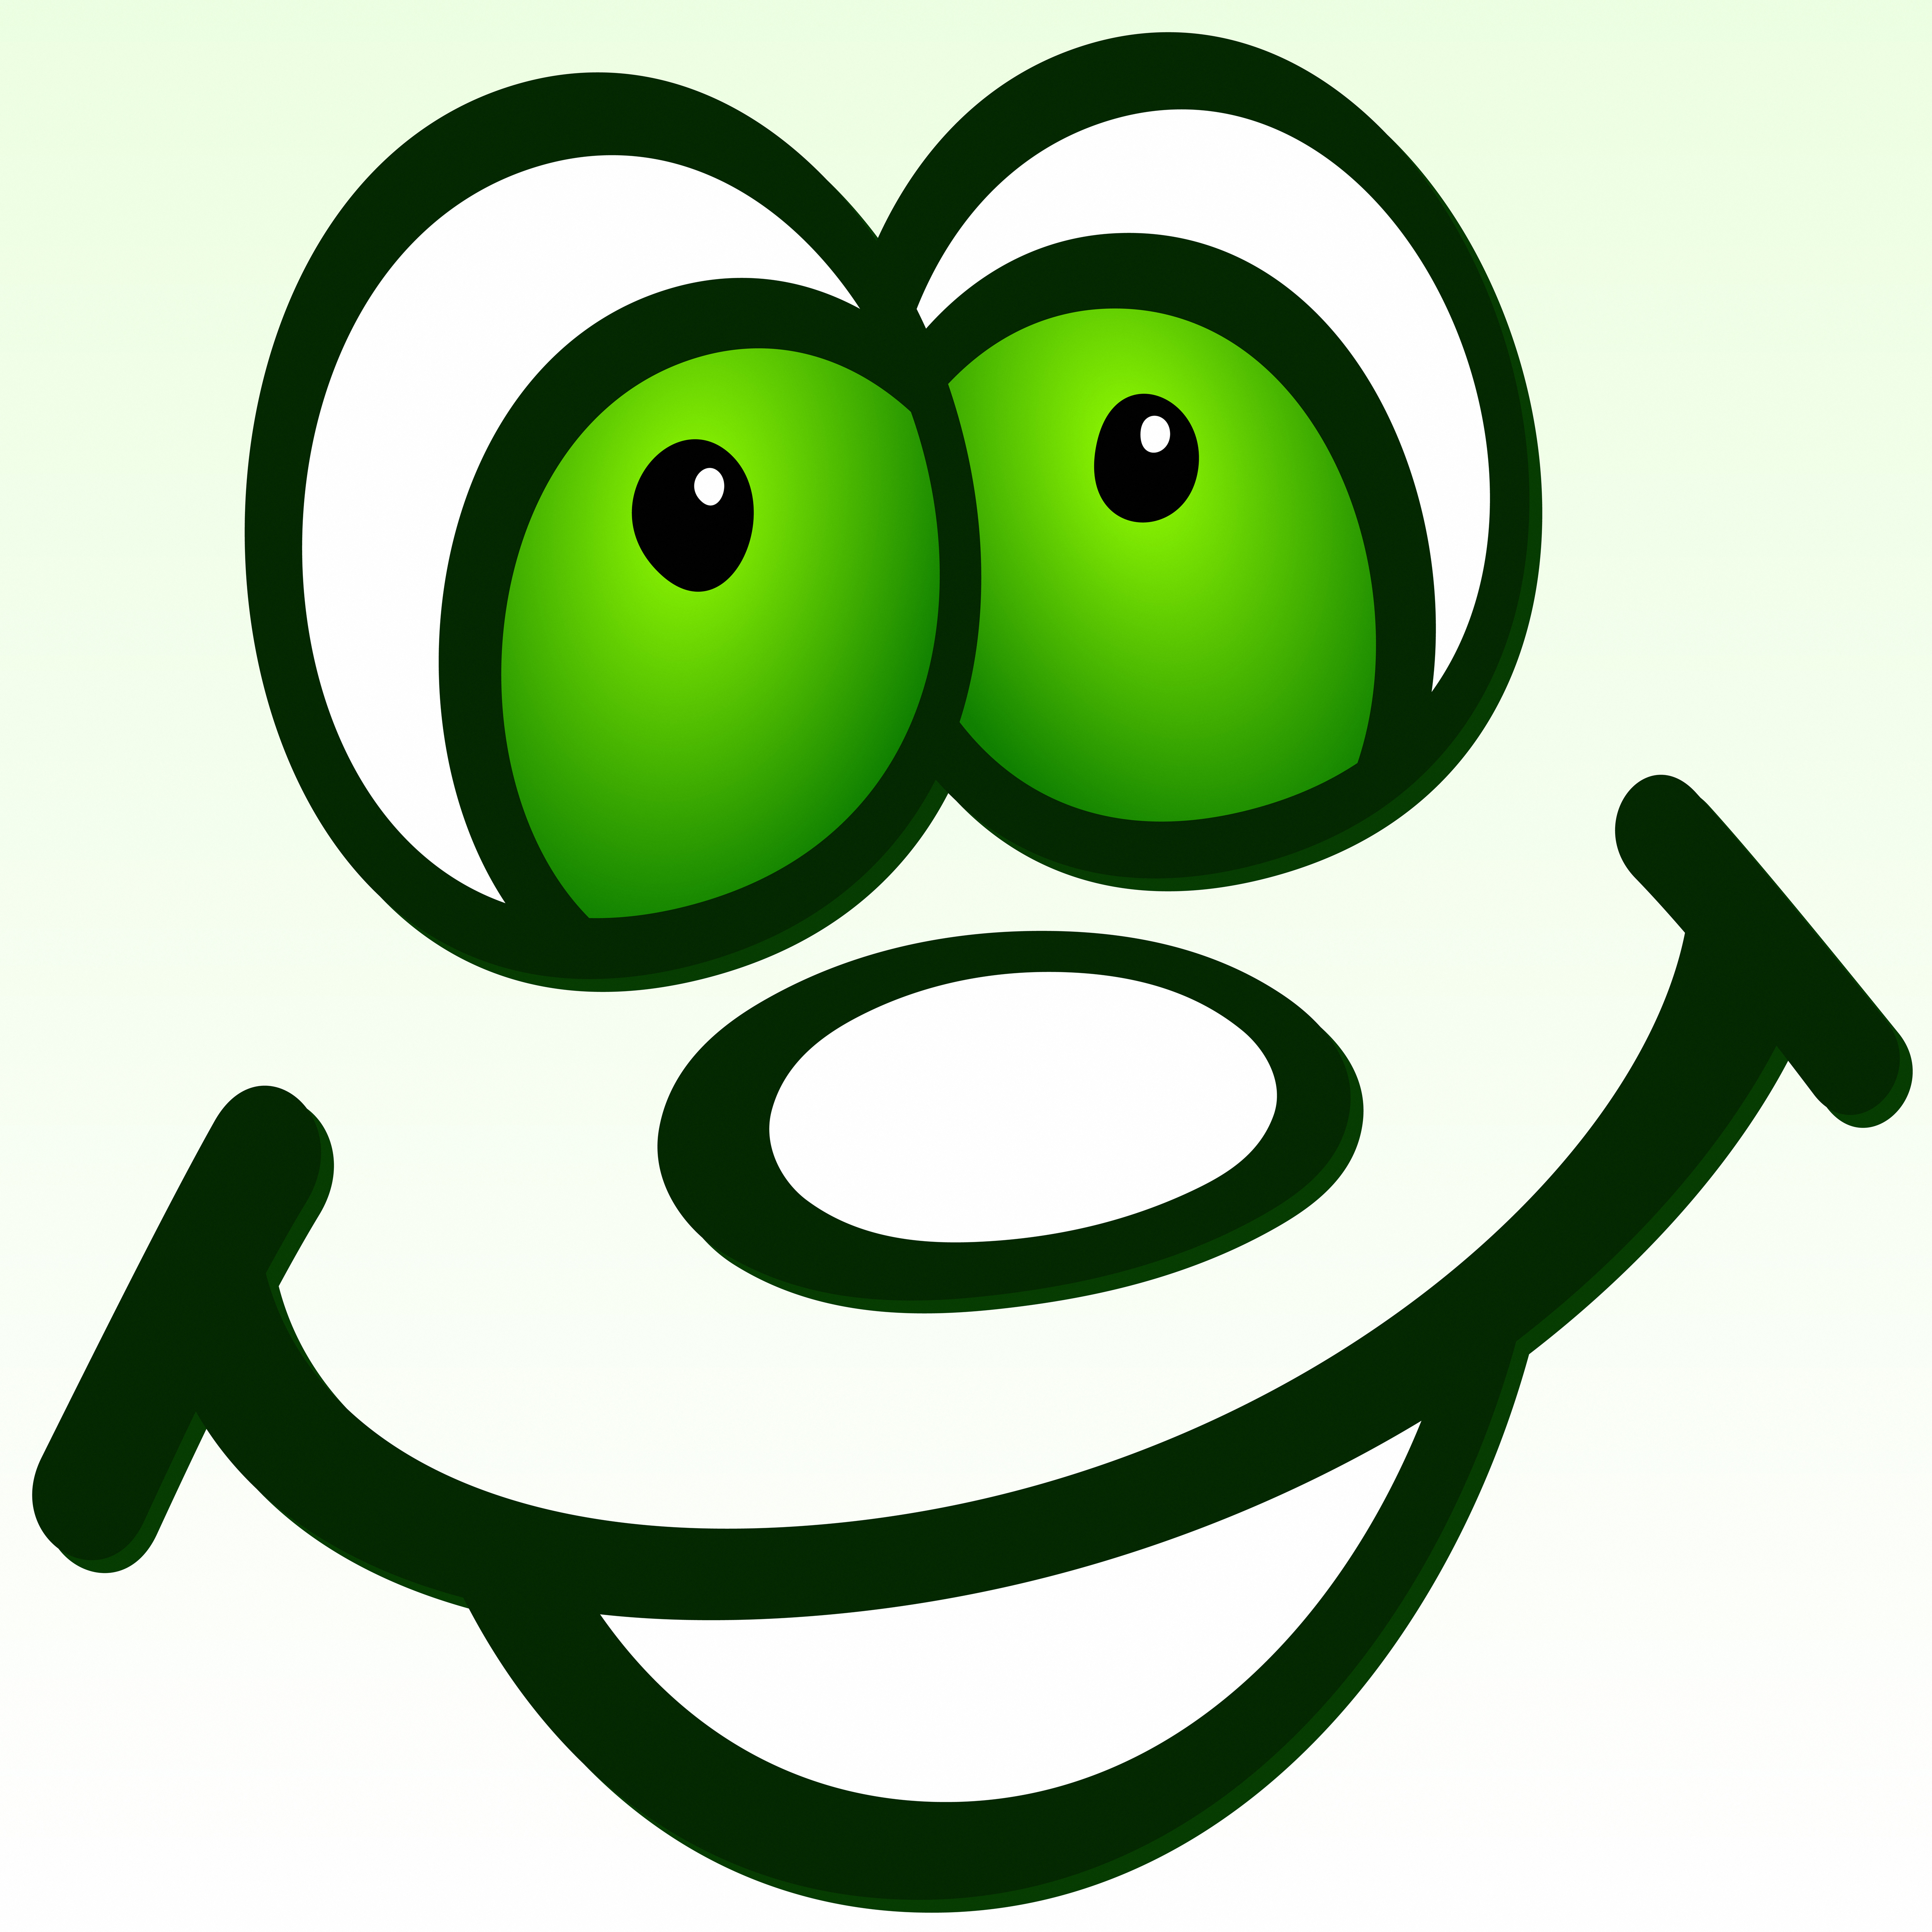 Google eyes with a smile clipart